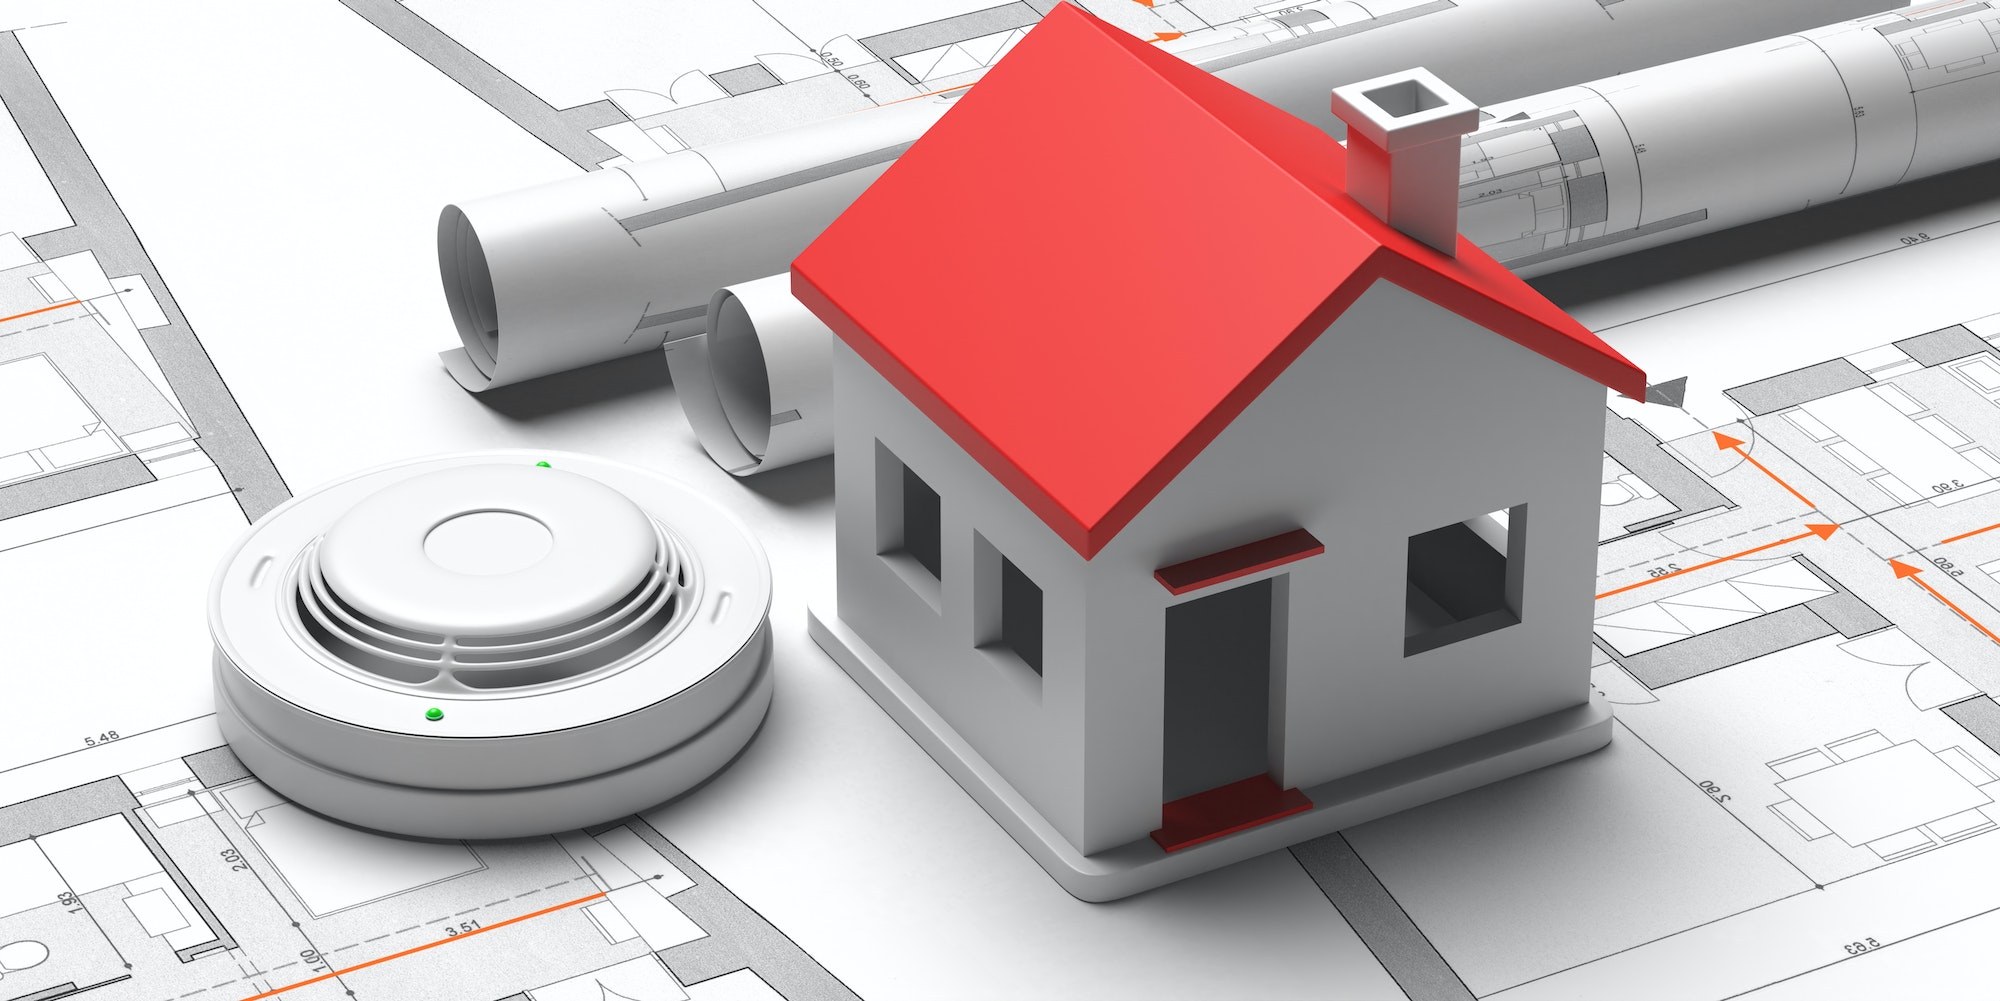 Smoke detector and small house on blueprint drawing background. Fire safety system. 3d illustration